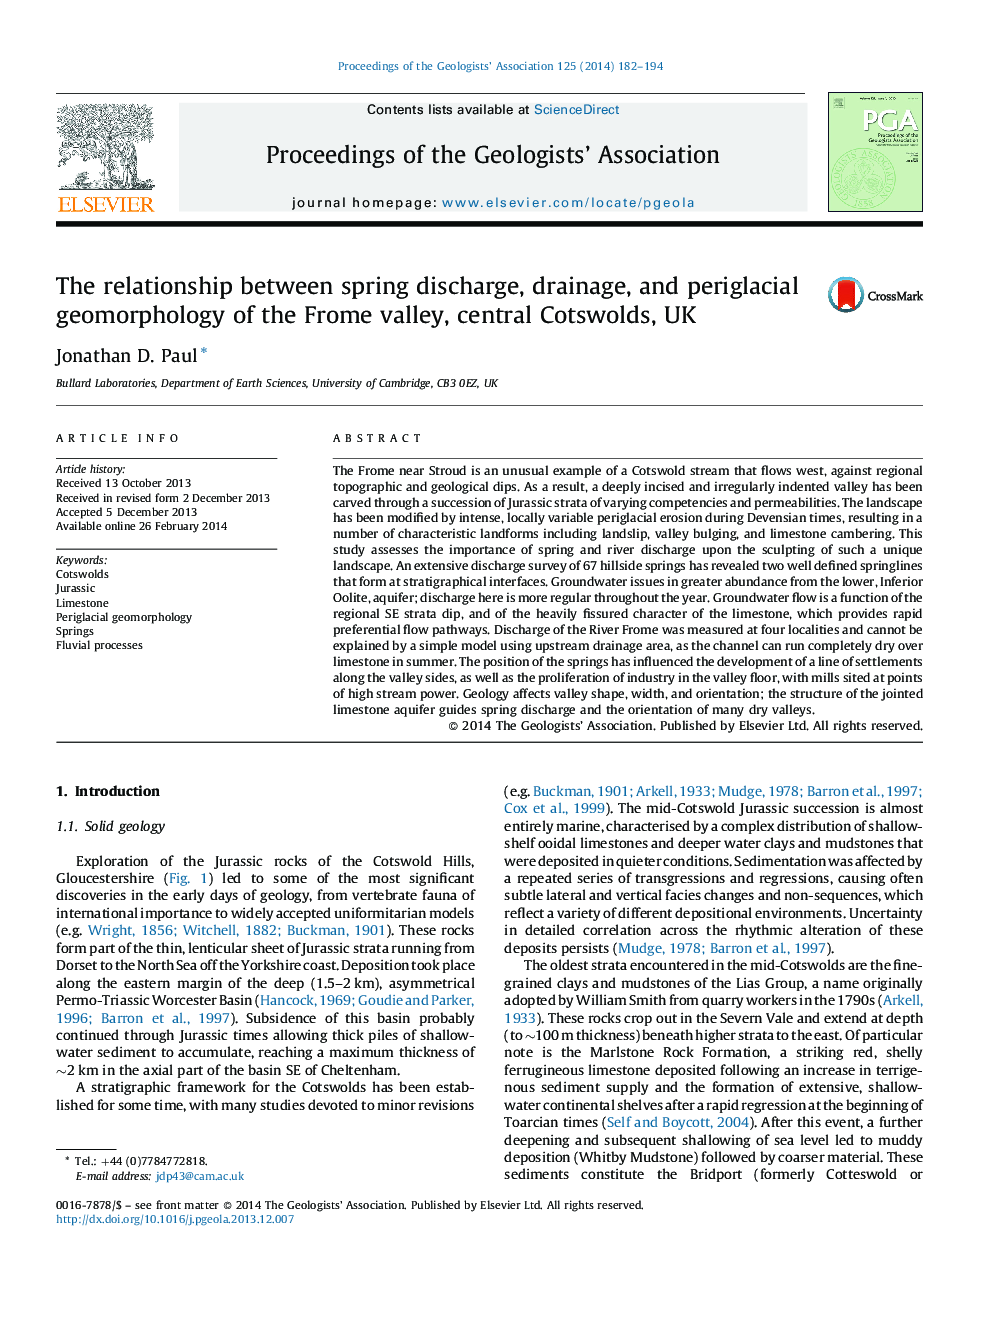 The relationship between spring discharge, drainage, and periglacial geomorphology of the Frome valley, central Cotswolds, UK